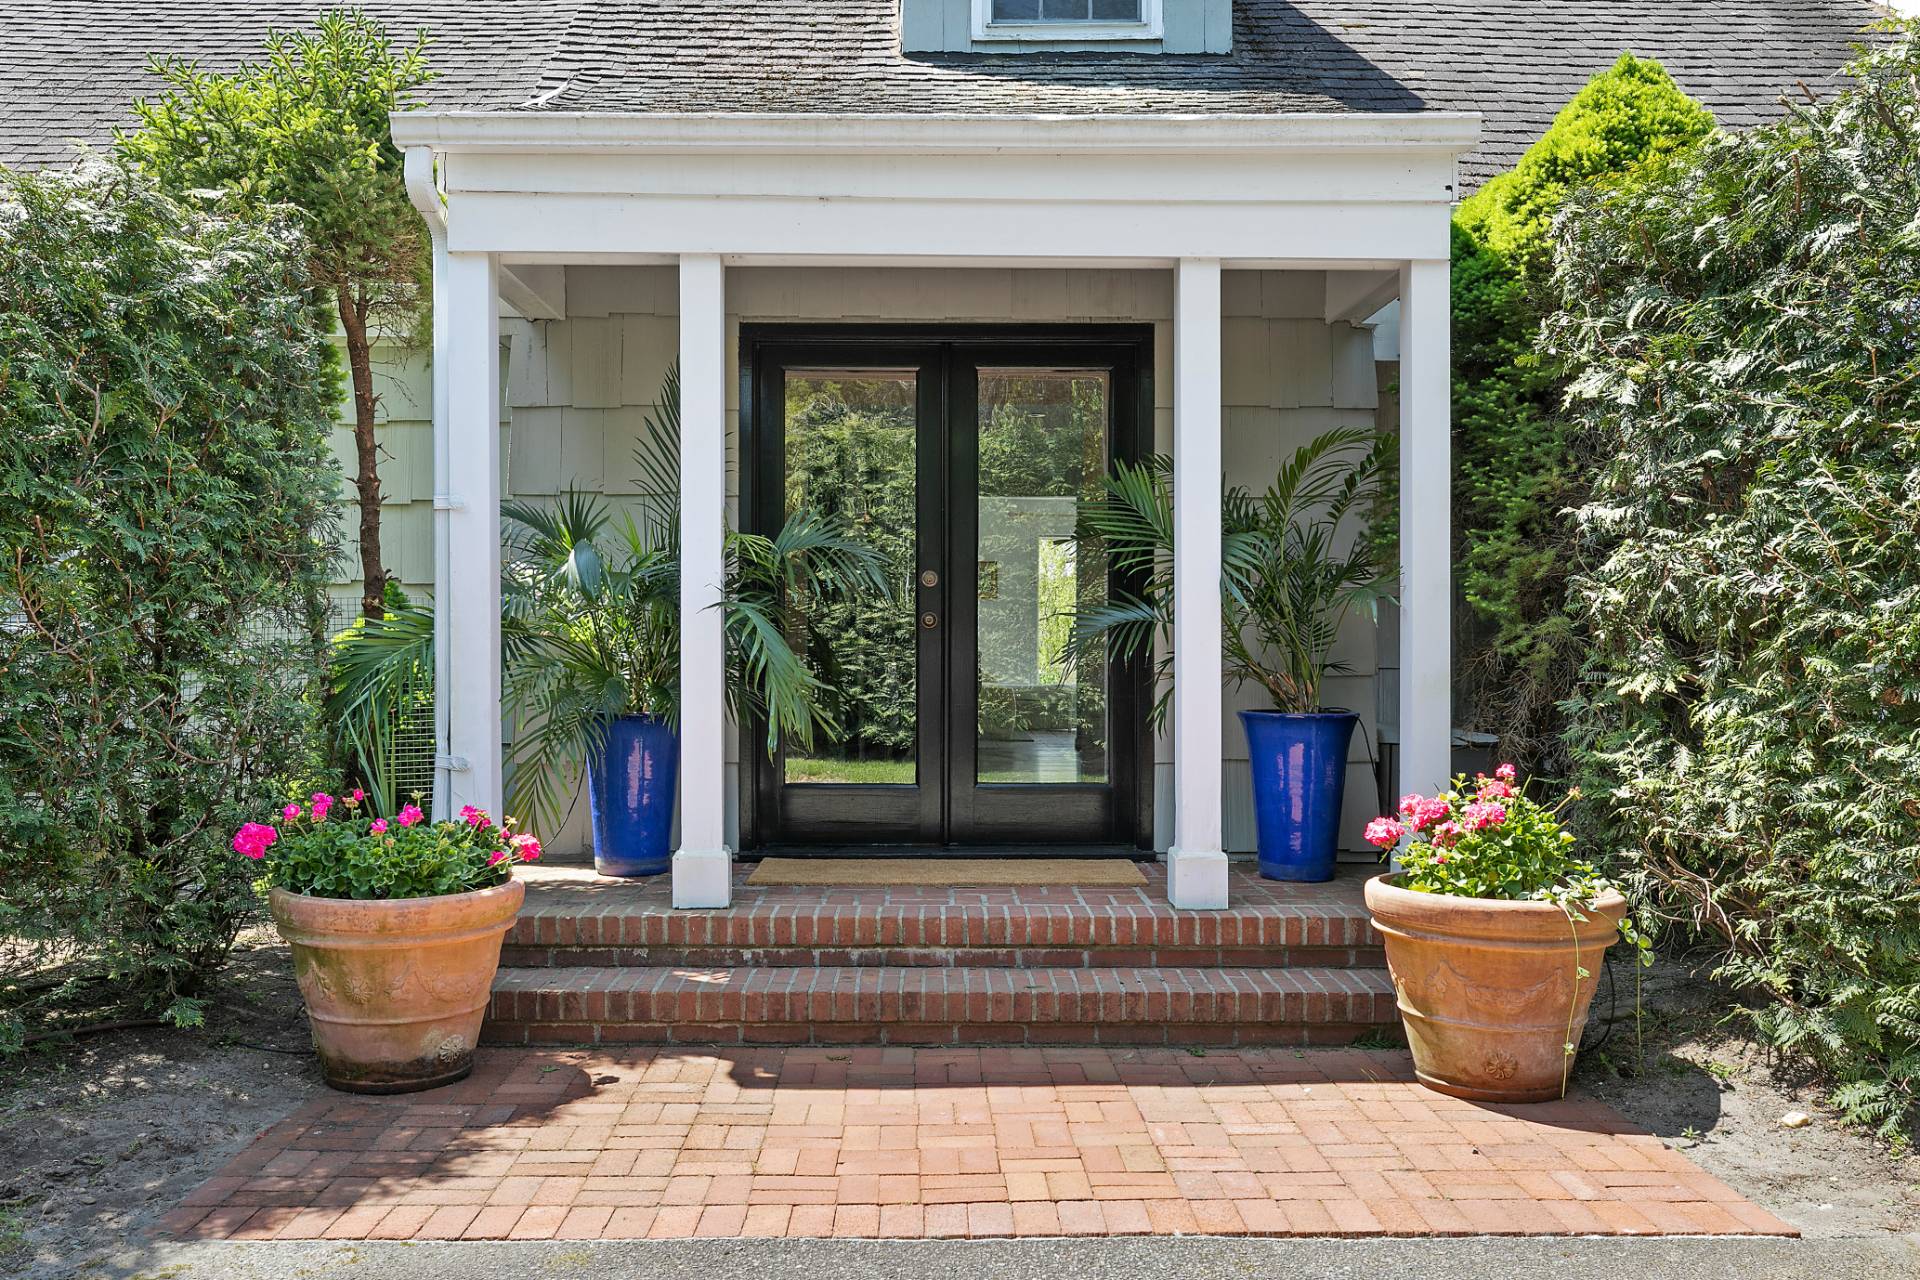 a view of house outdoor space with potted plants